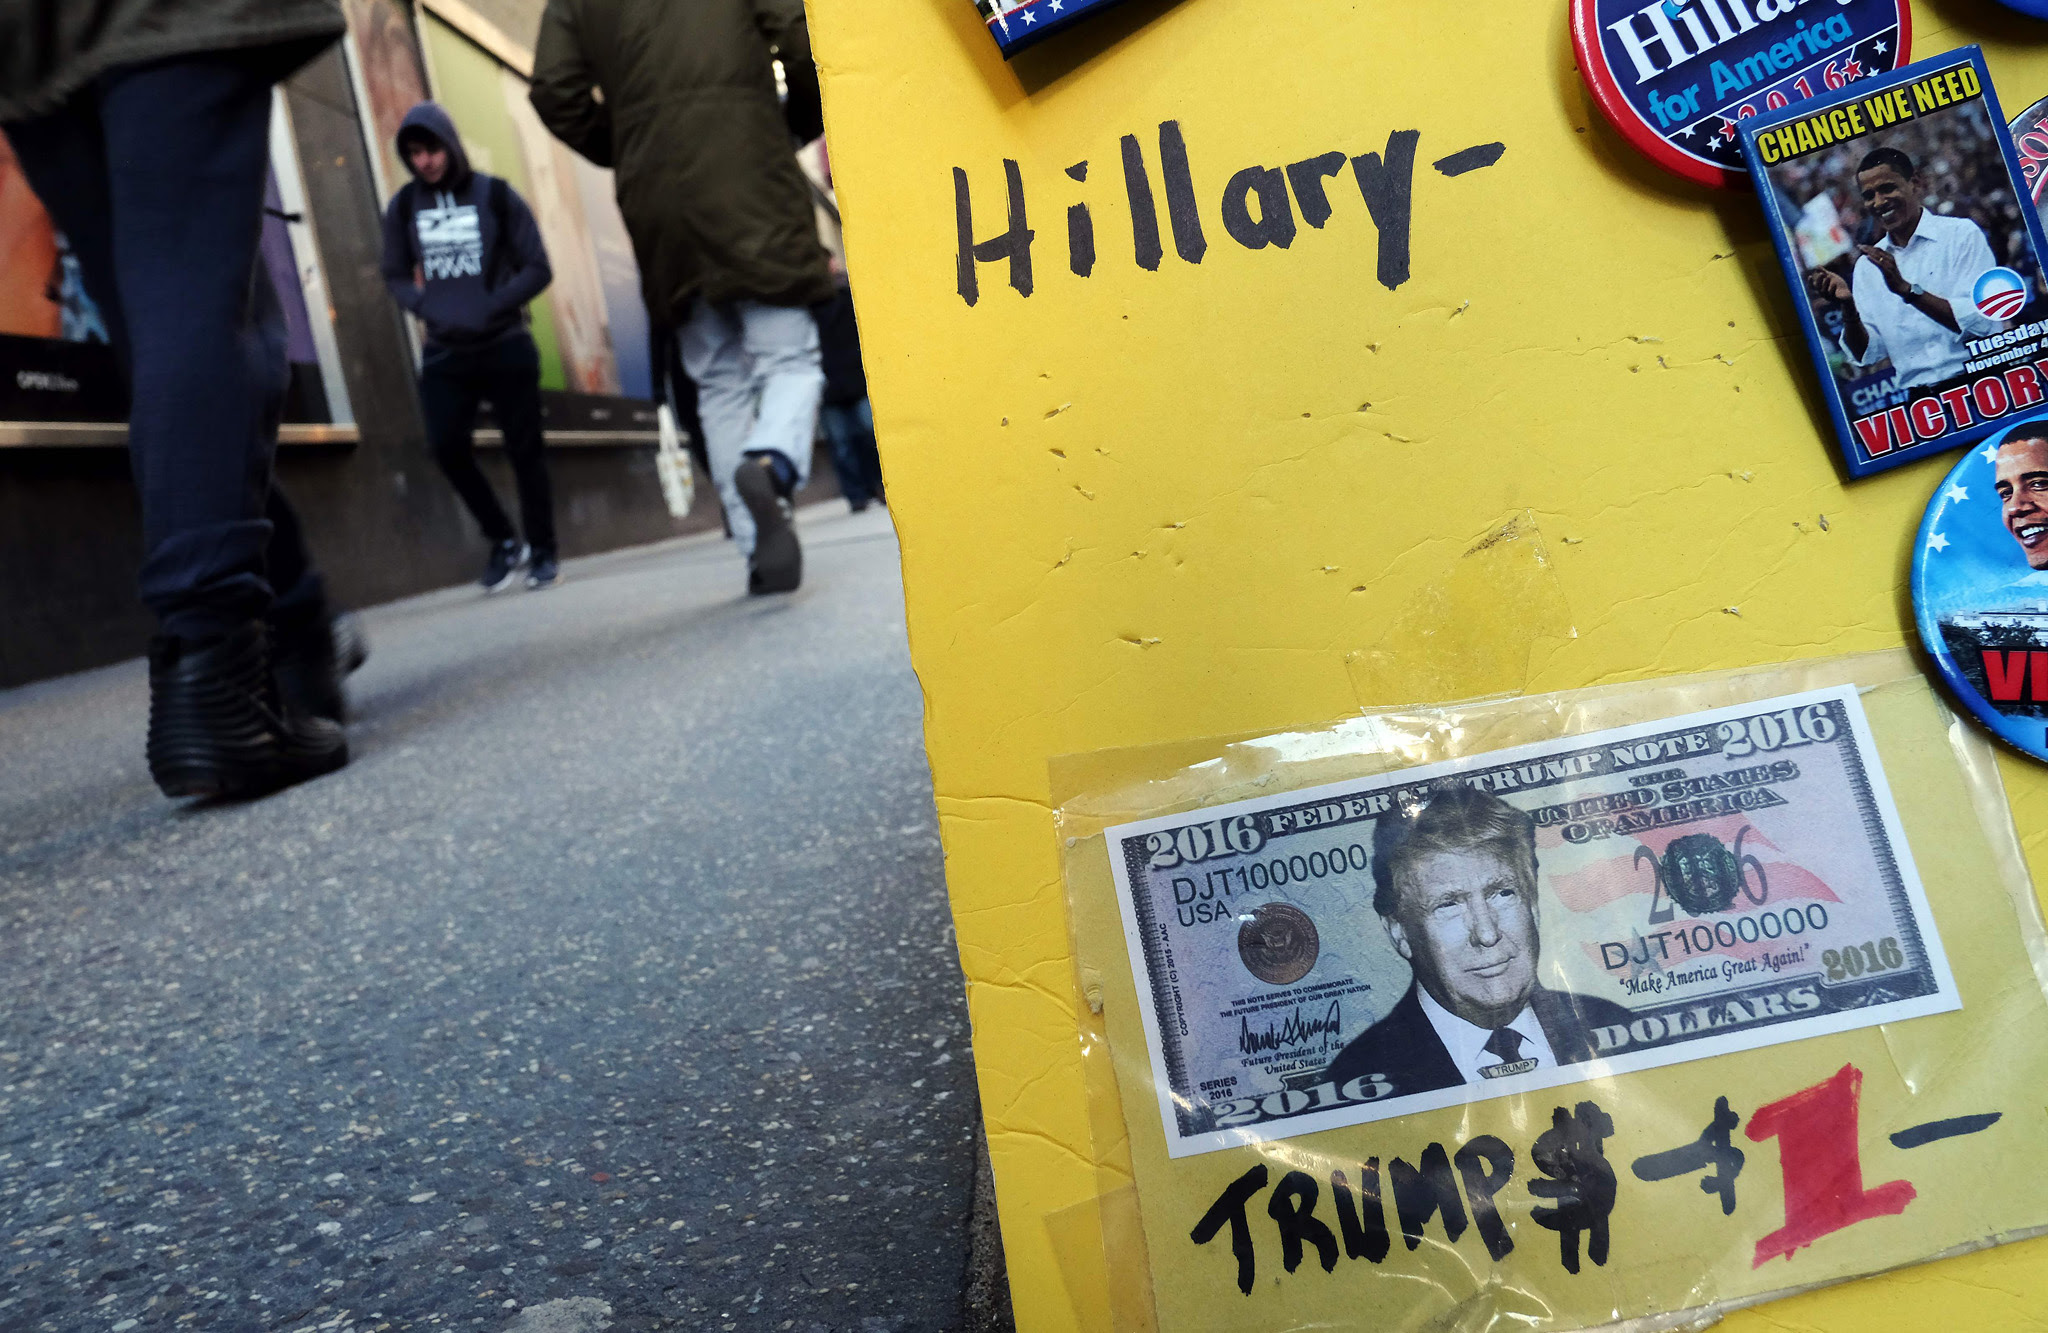 A fake dollar bill with US Republican pr...A fake dollar bill with US Republican presidential candidate Donald Trump's picture on it is displayed for sale with other electoral items at a roadside stall as pedestrians walk past in New York on February 26, 2016. White House hopefuls Ted Cruz and Marco Rubio unleashed a barrage of attacks against Donald Trump during raucous Republican debate on February 25, as they sought to halt the billionaire frontrunner's seemingly relentless march to the party's nomination. / AFP / Jewel SamadJEWEL SAMAD/AFP/Getty Images